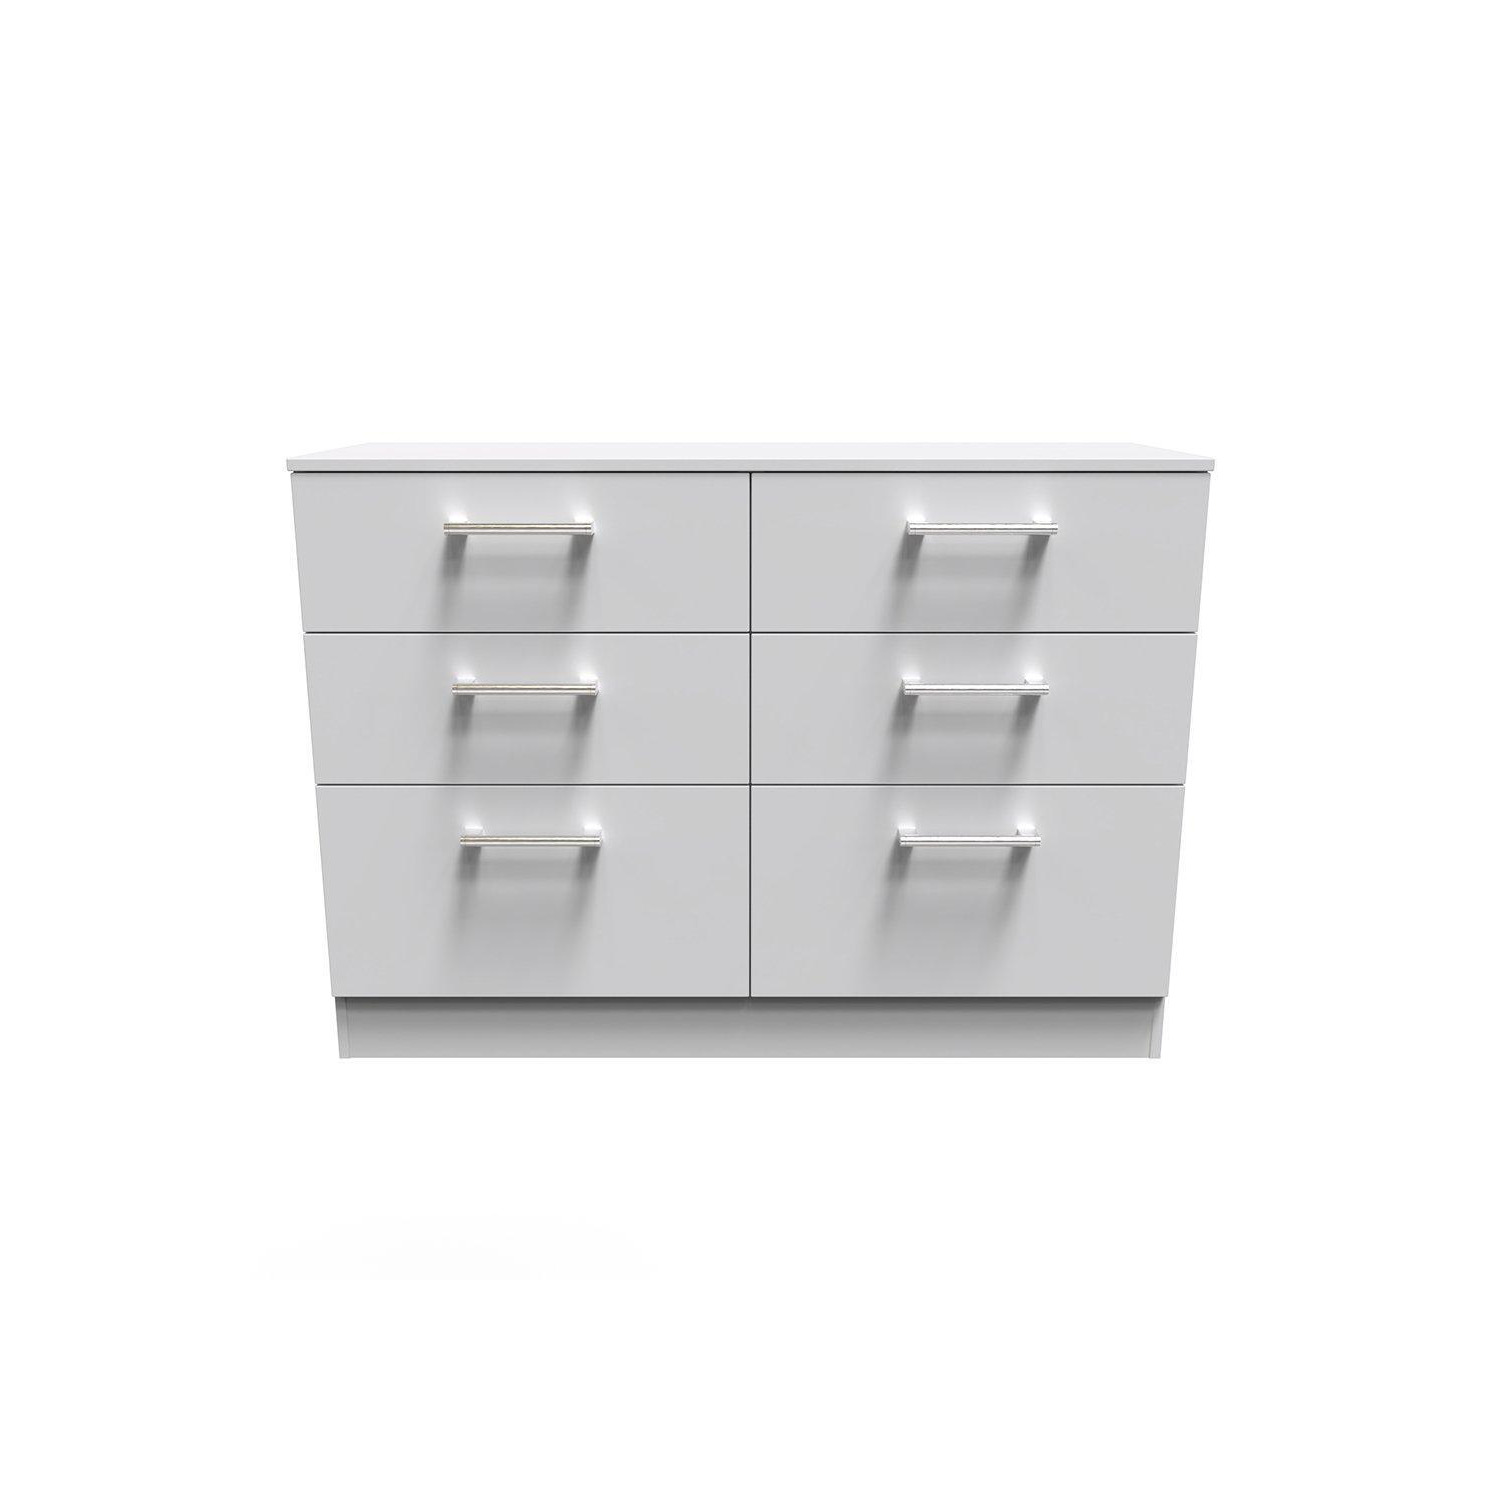 Cornwall 6 Drawer Wide Chest (Ready Assembled) - image 1